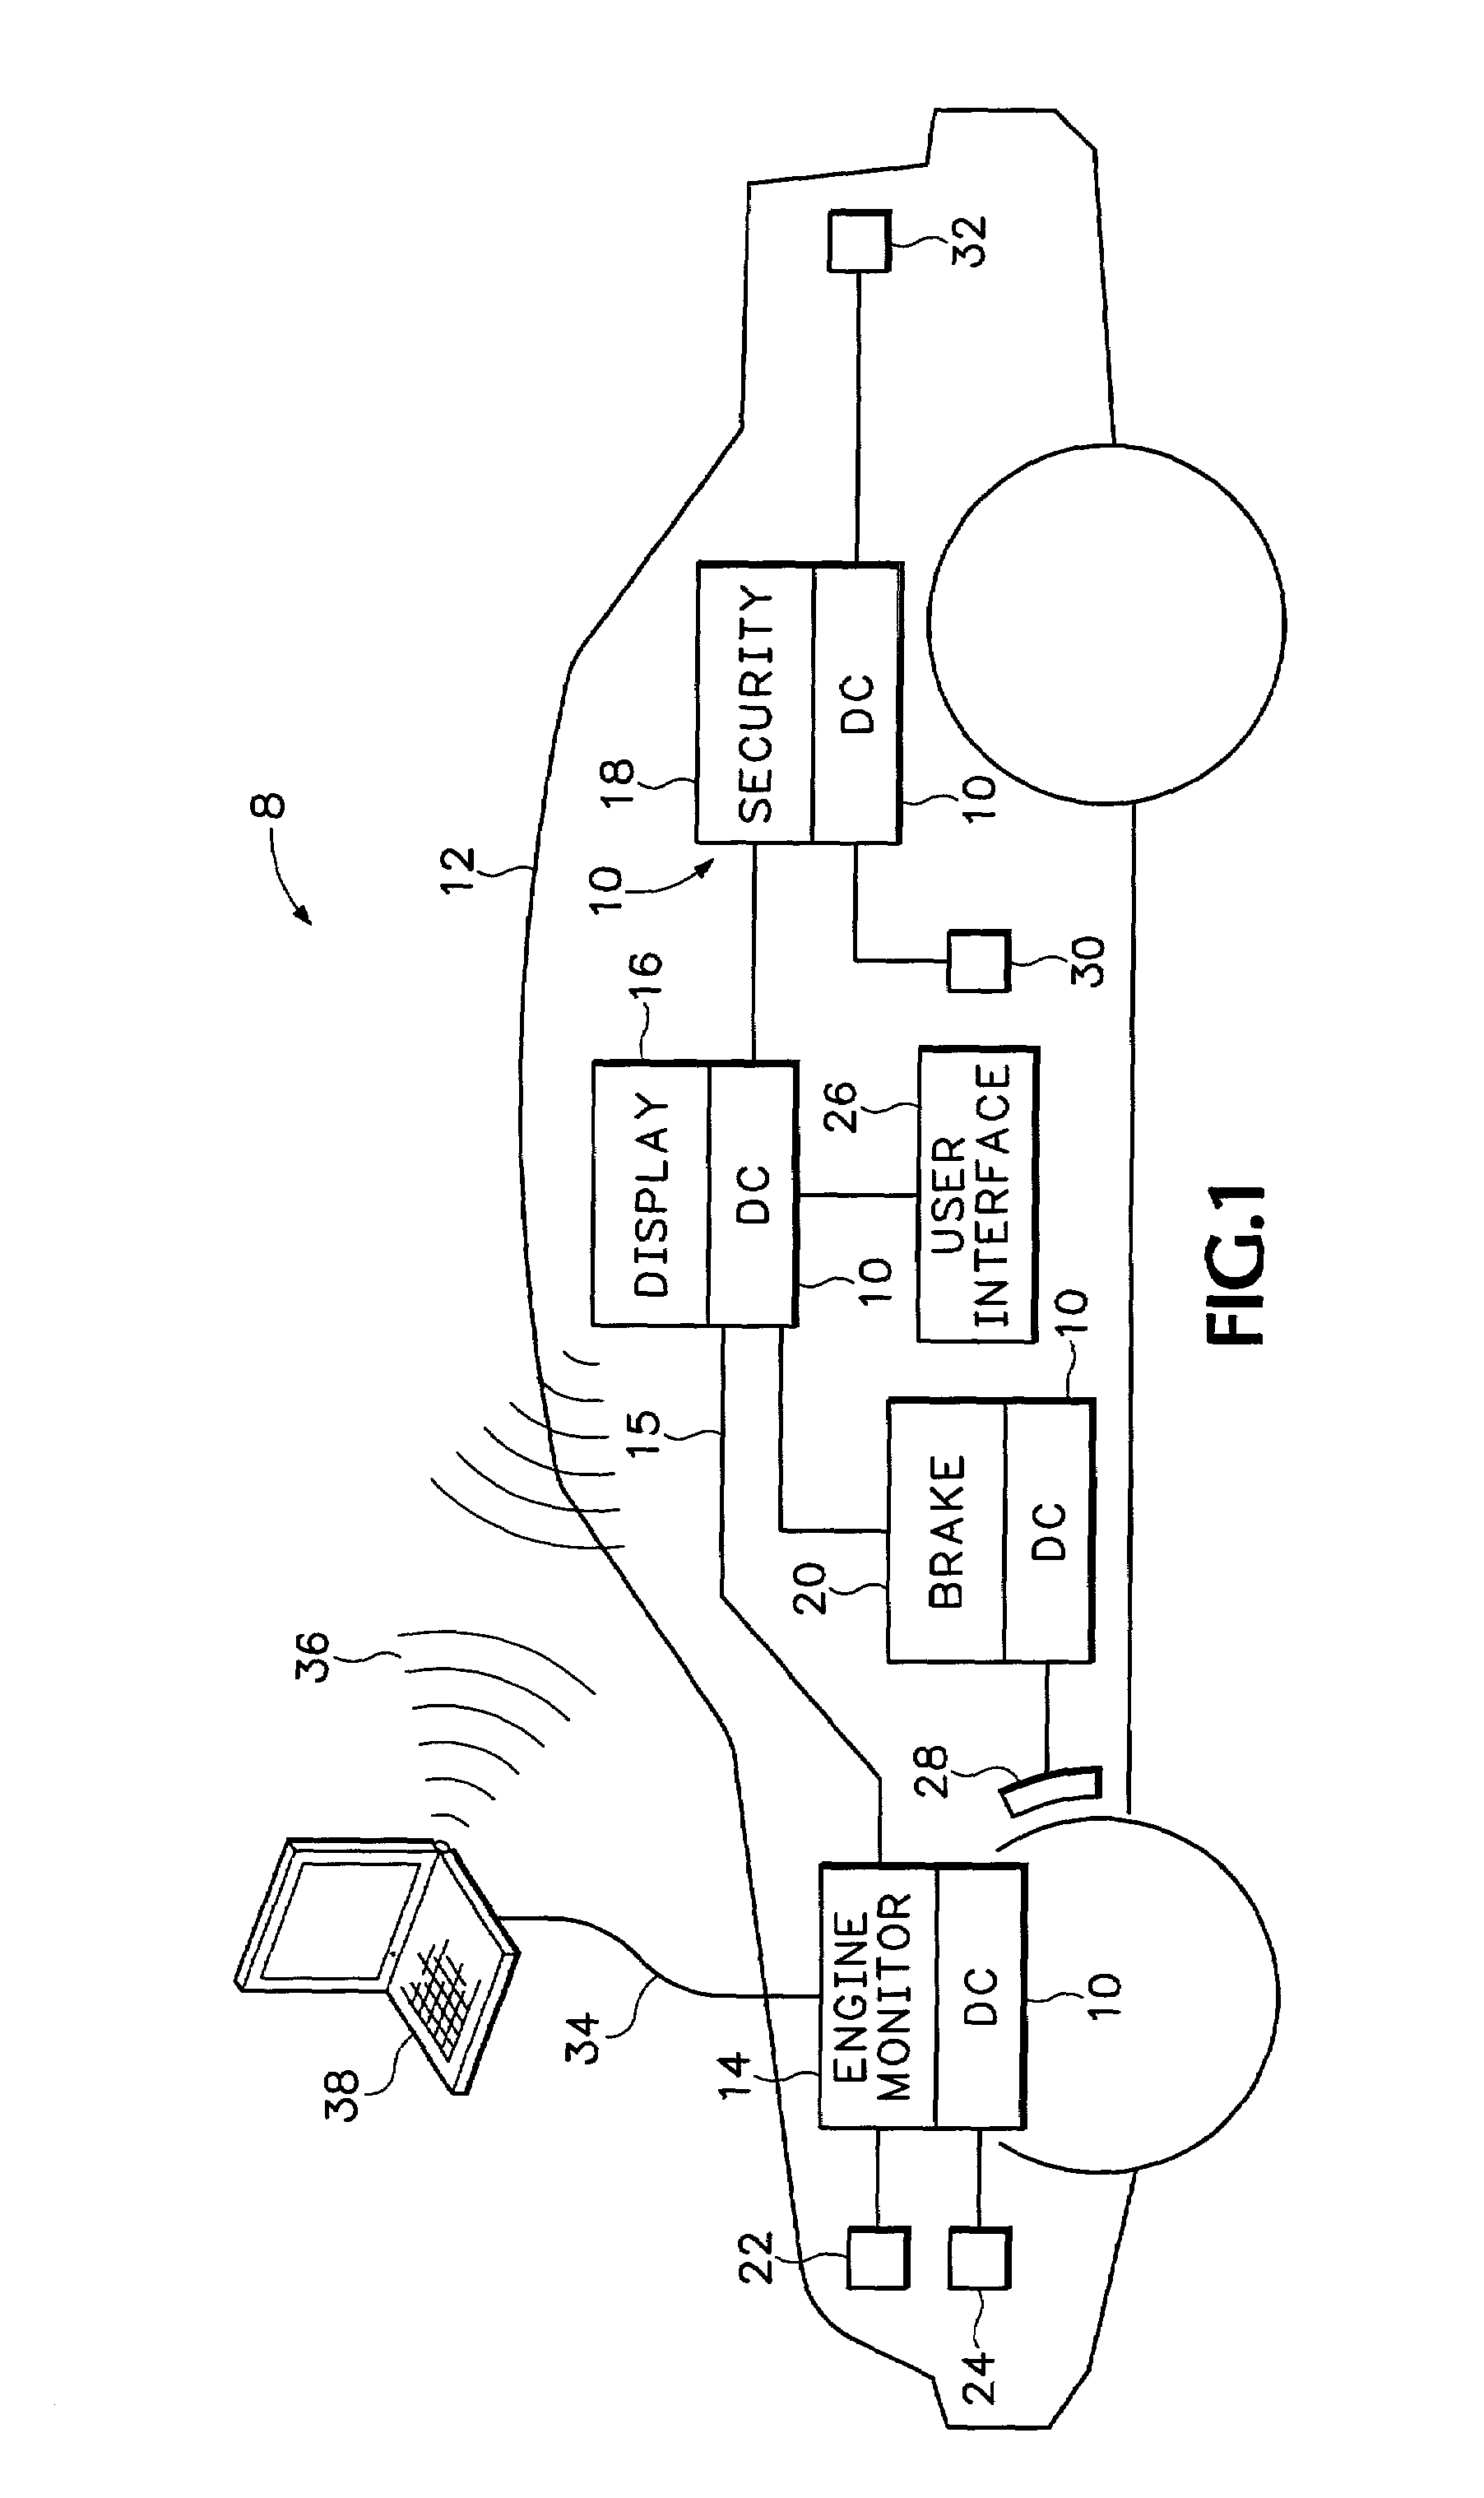 Method and apparatus for dynamic configuration of multiprocessor system